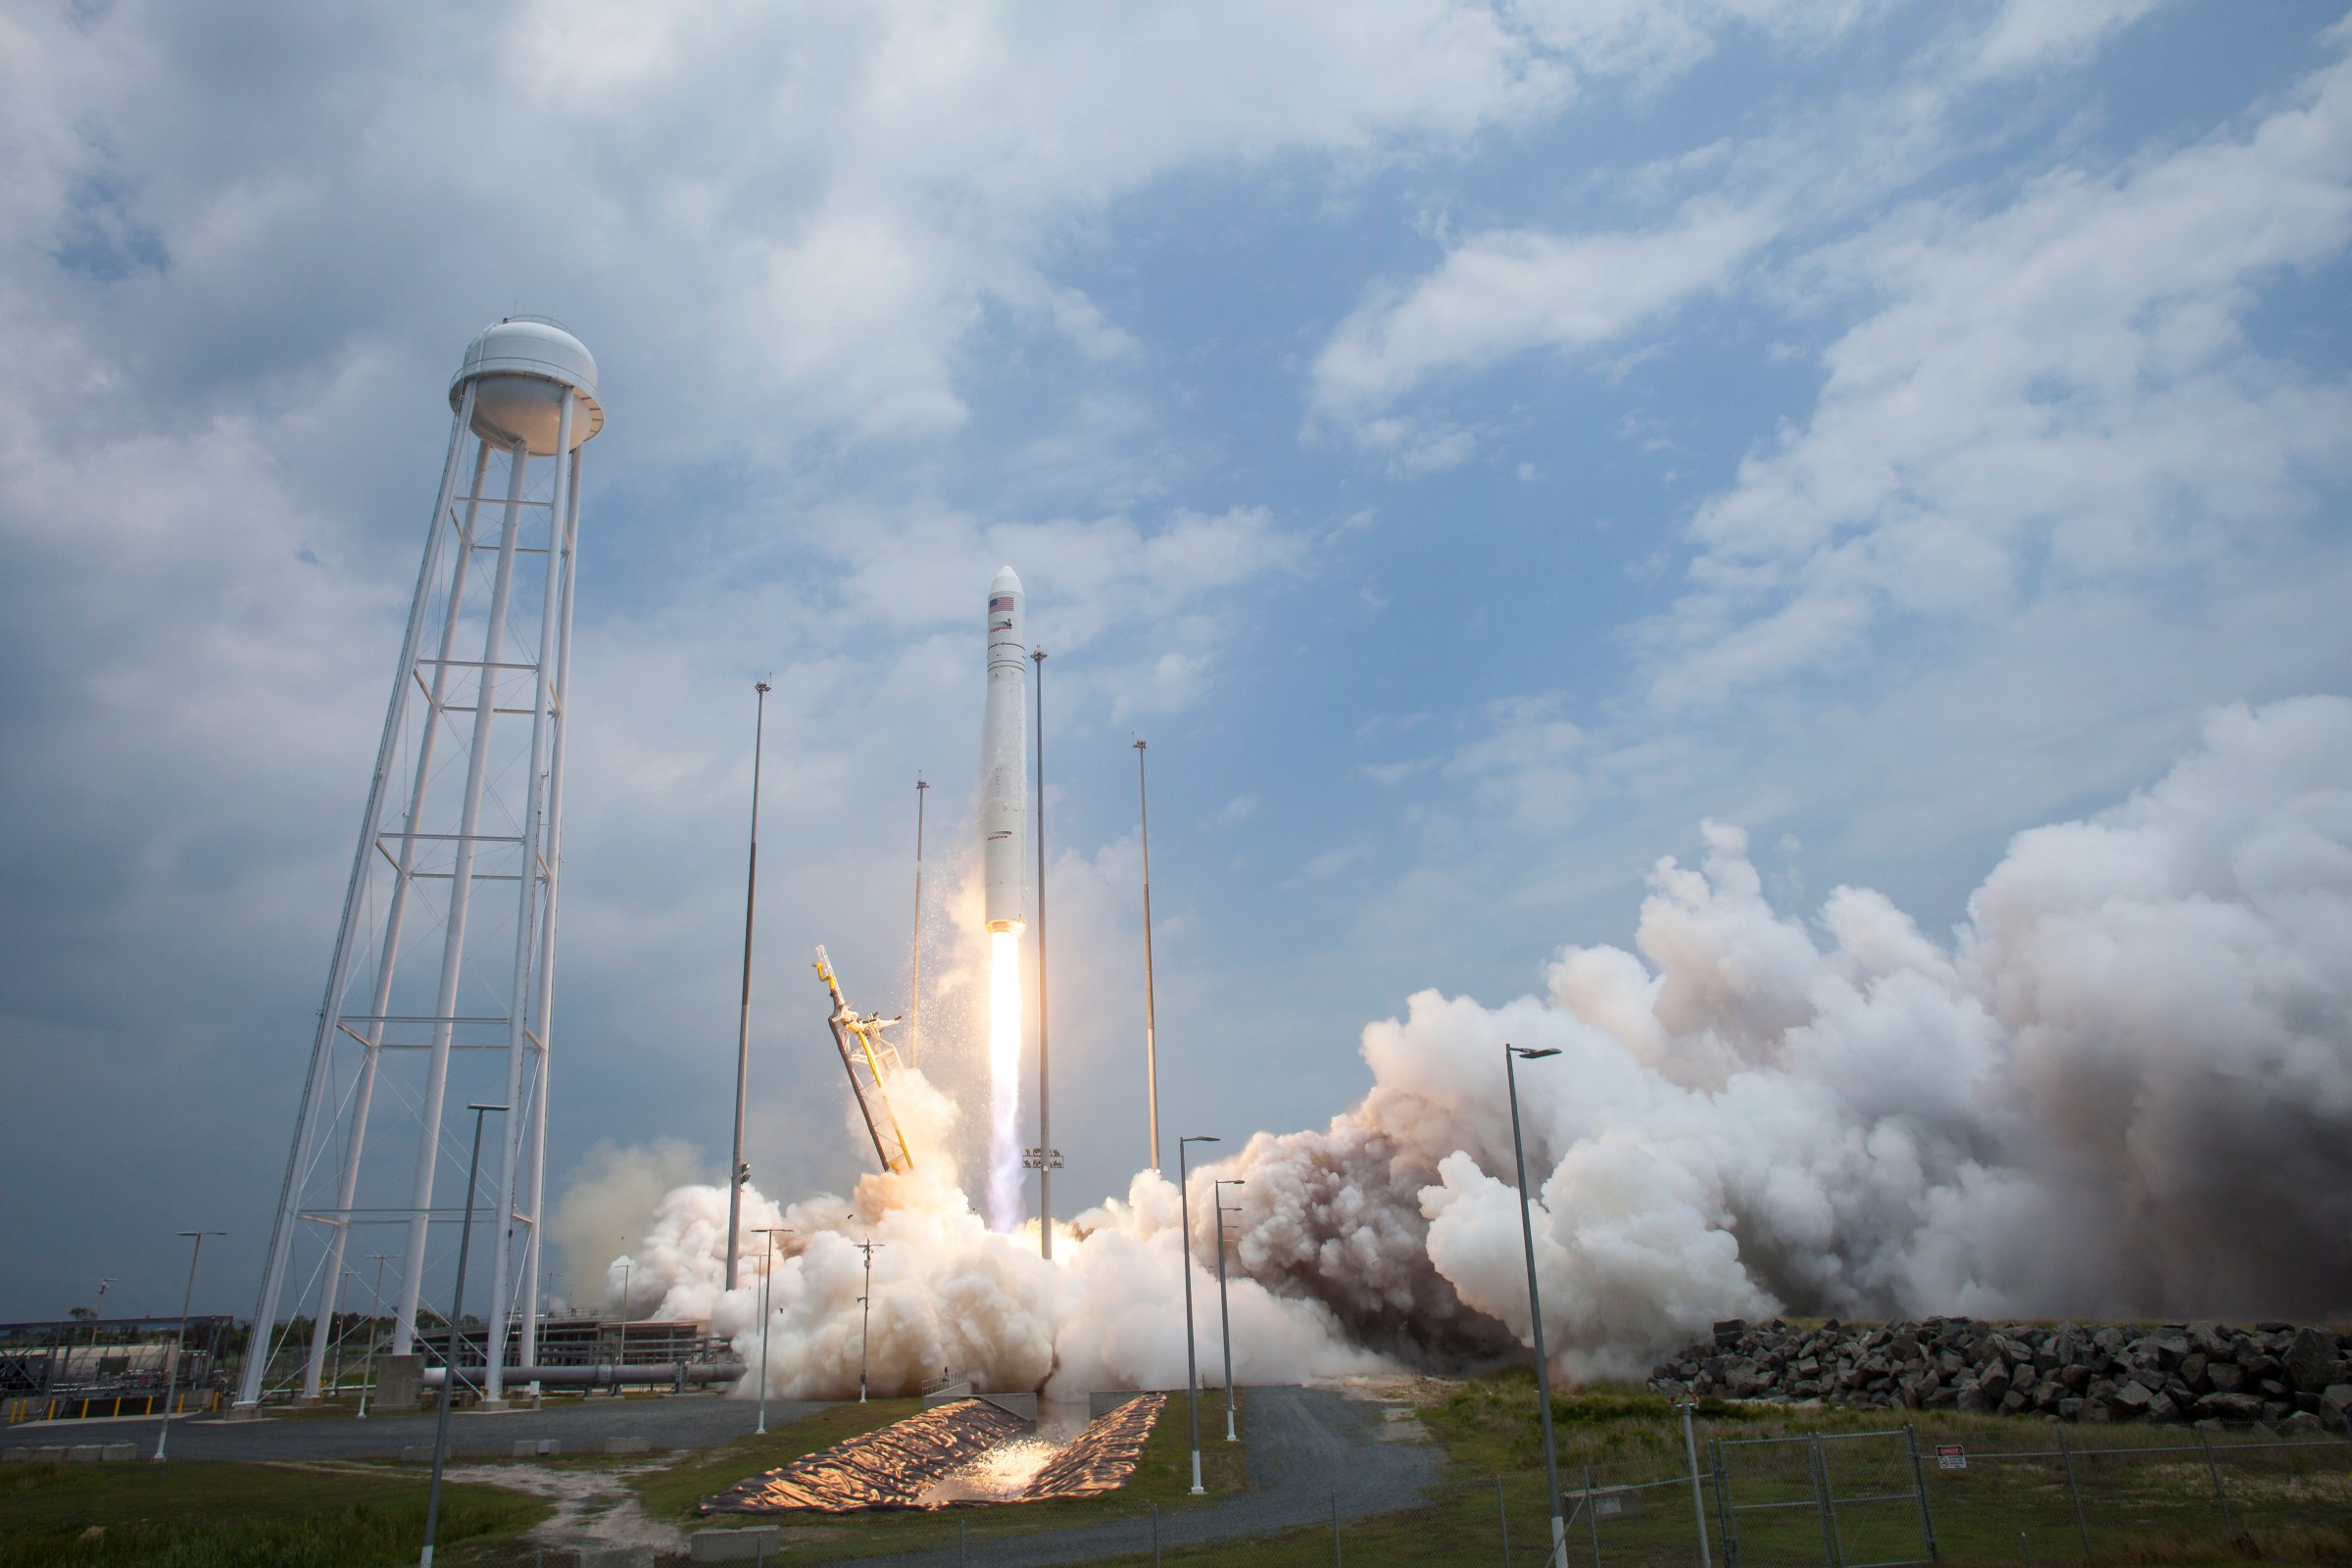 Cygnus Spacecraft Launches from Pad-0A